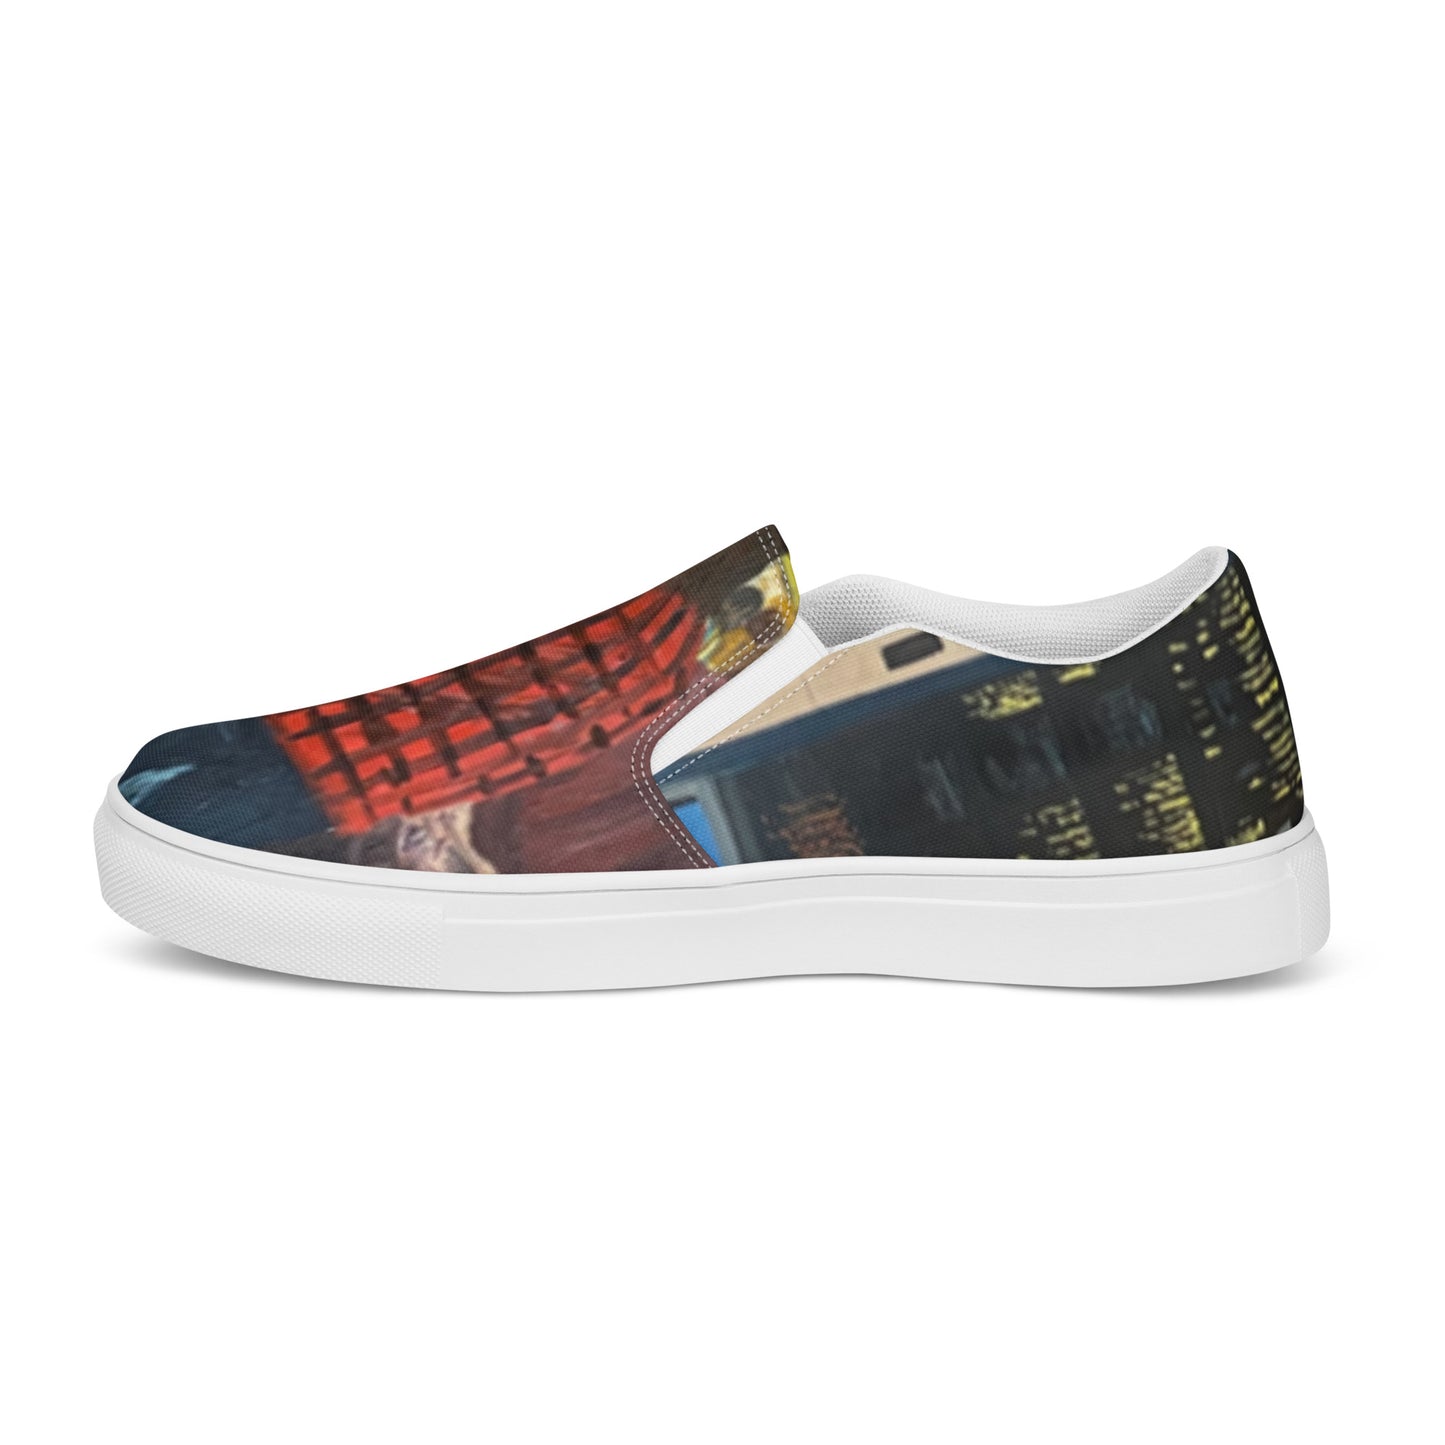 In the City - Women’s slip-on canvas shoes